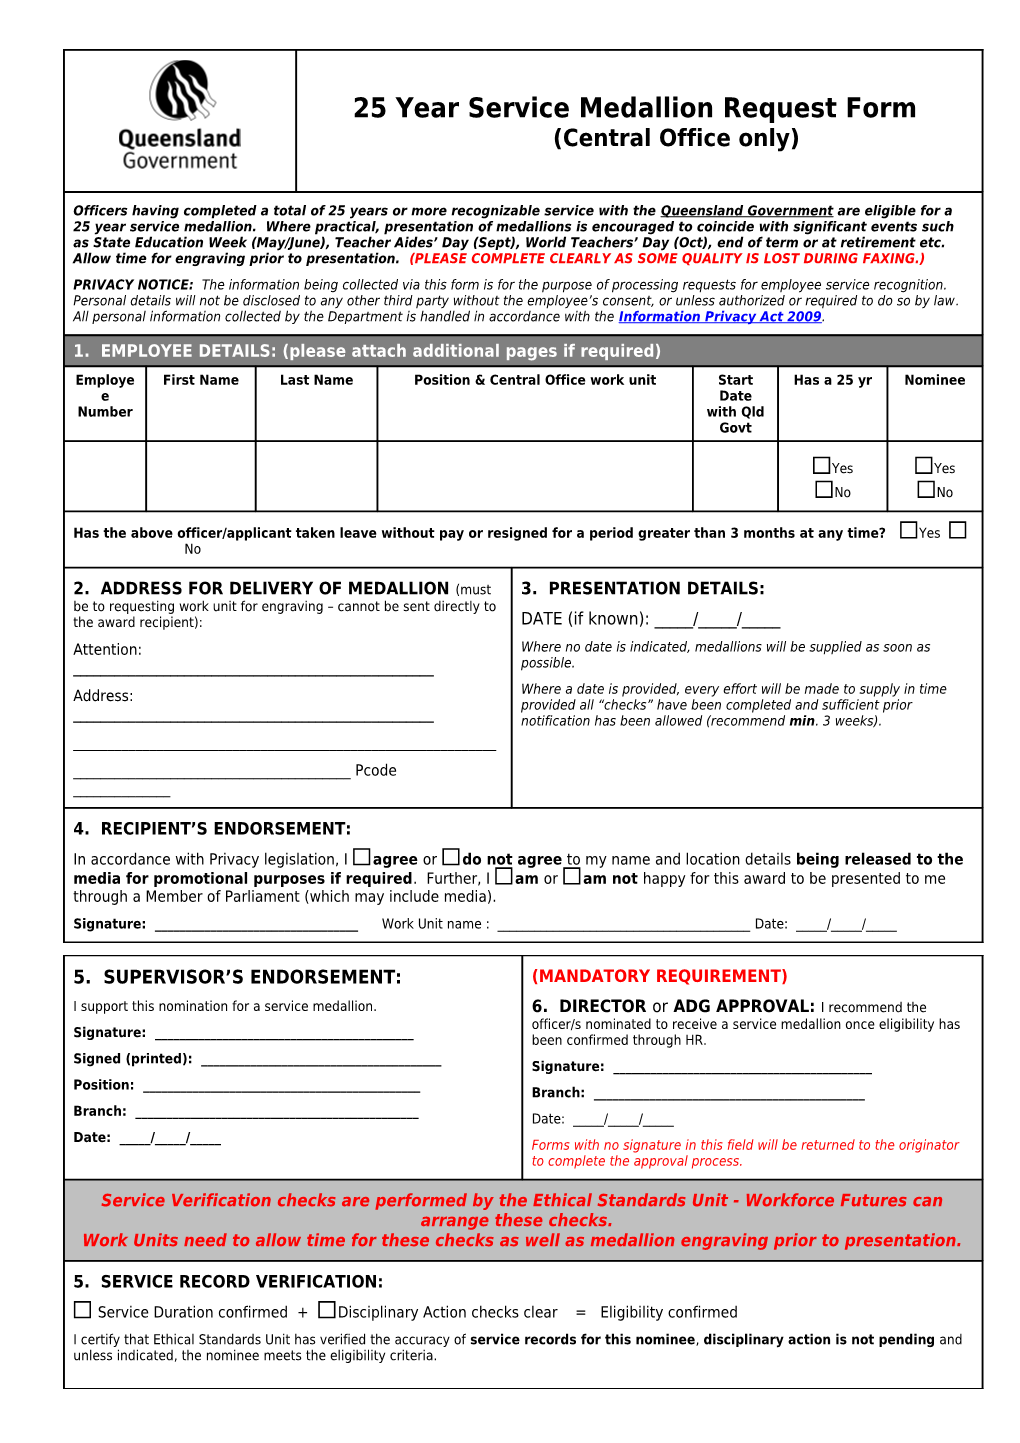 25 Year Service Medallion Application Form - Central Office